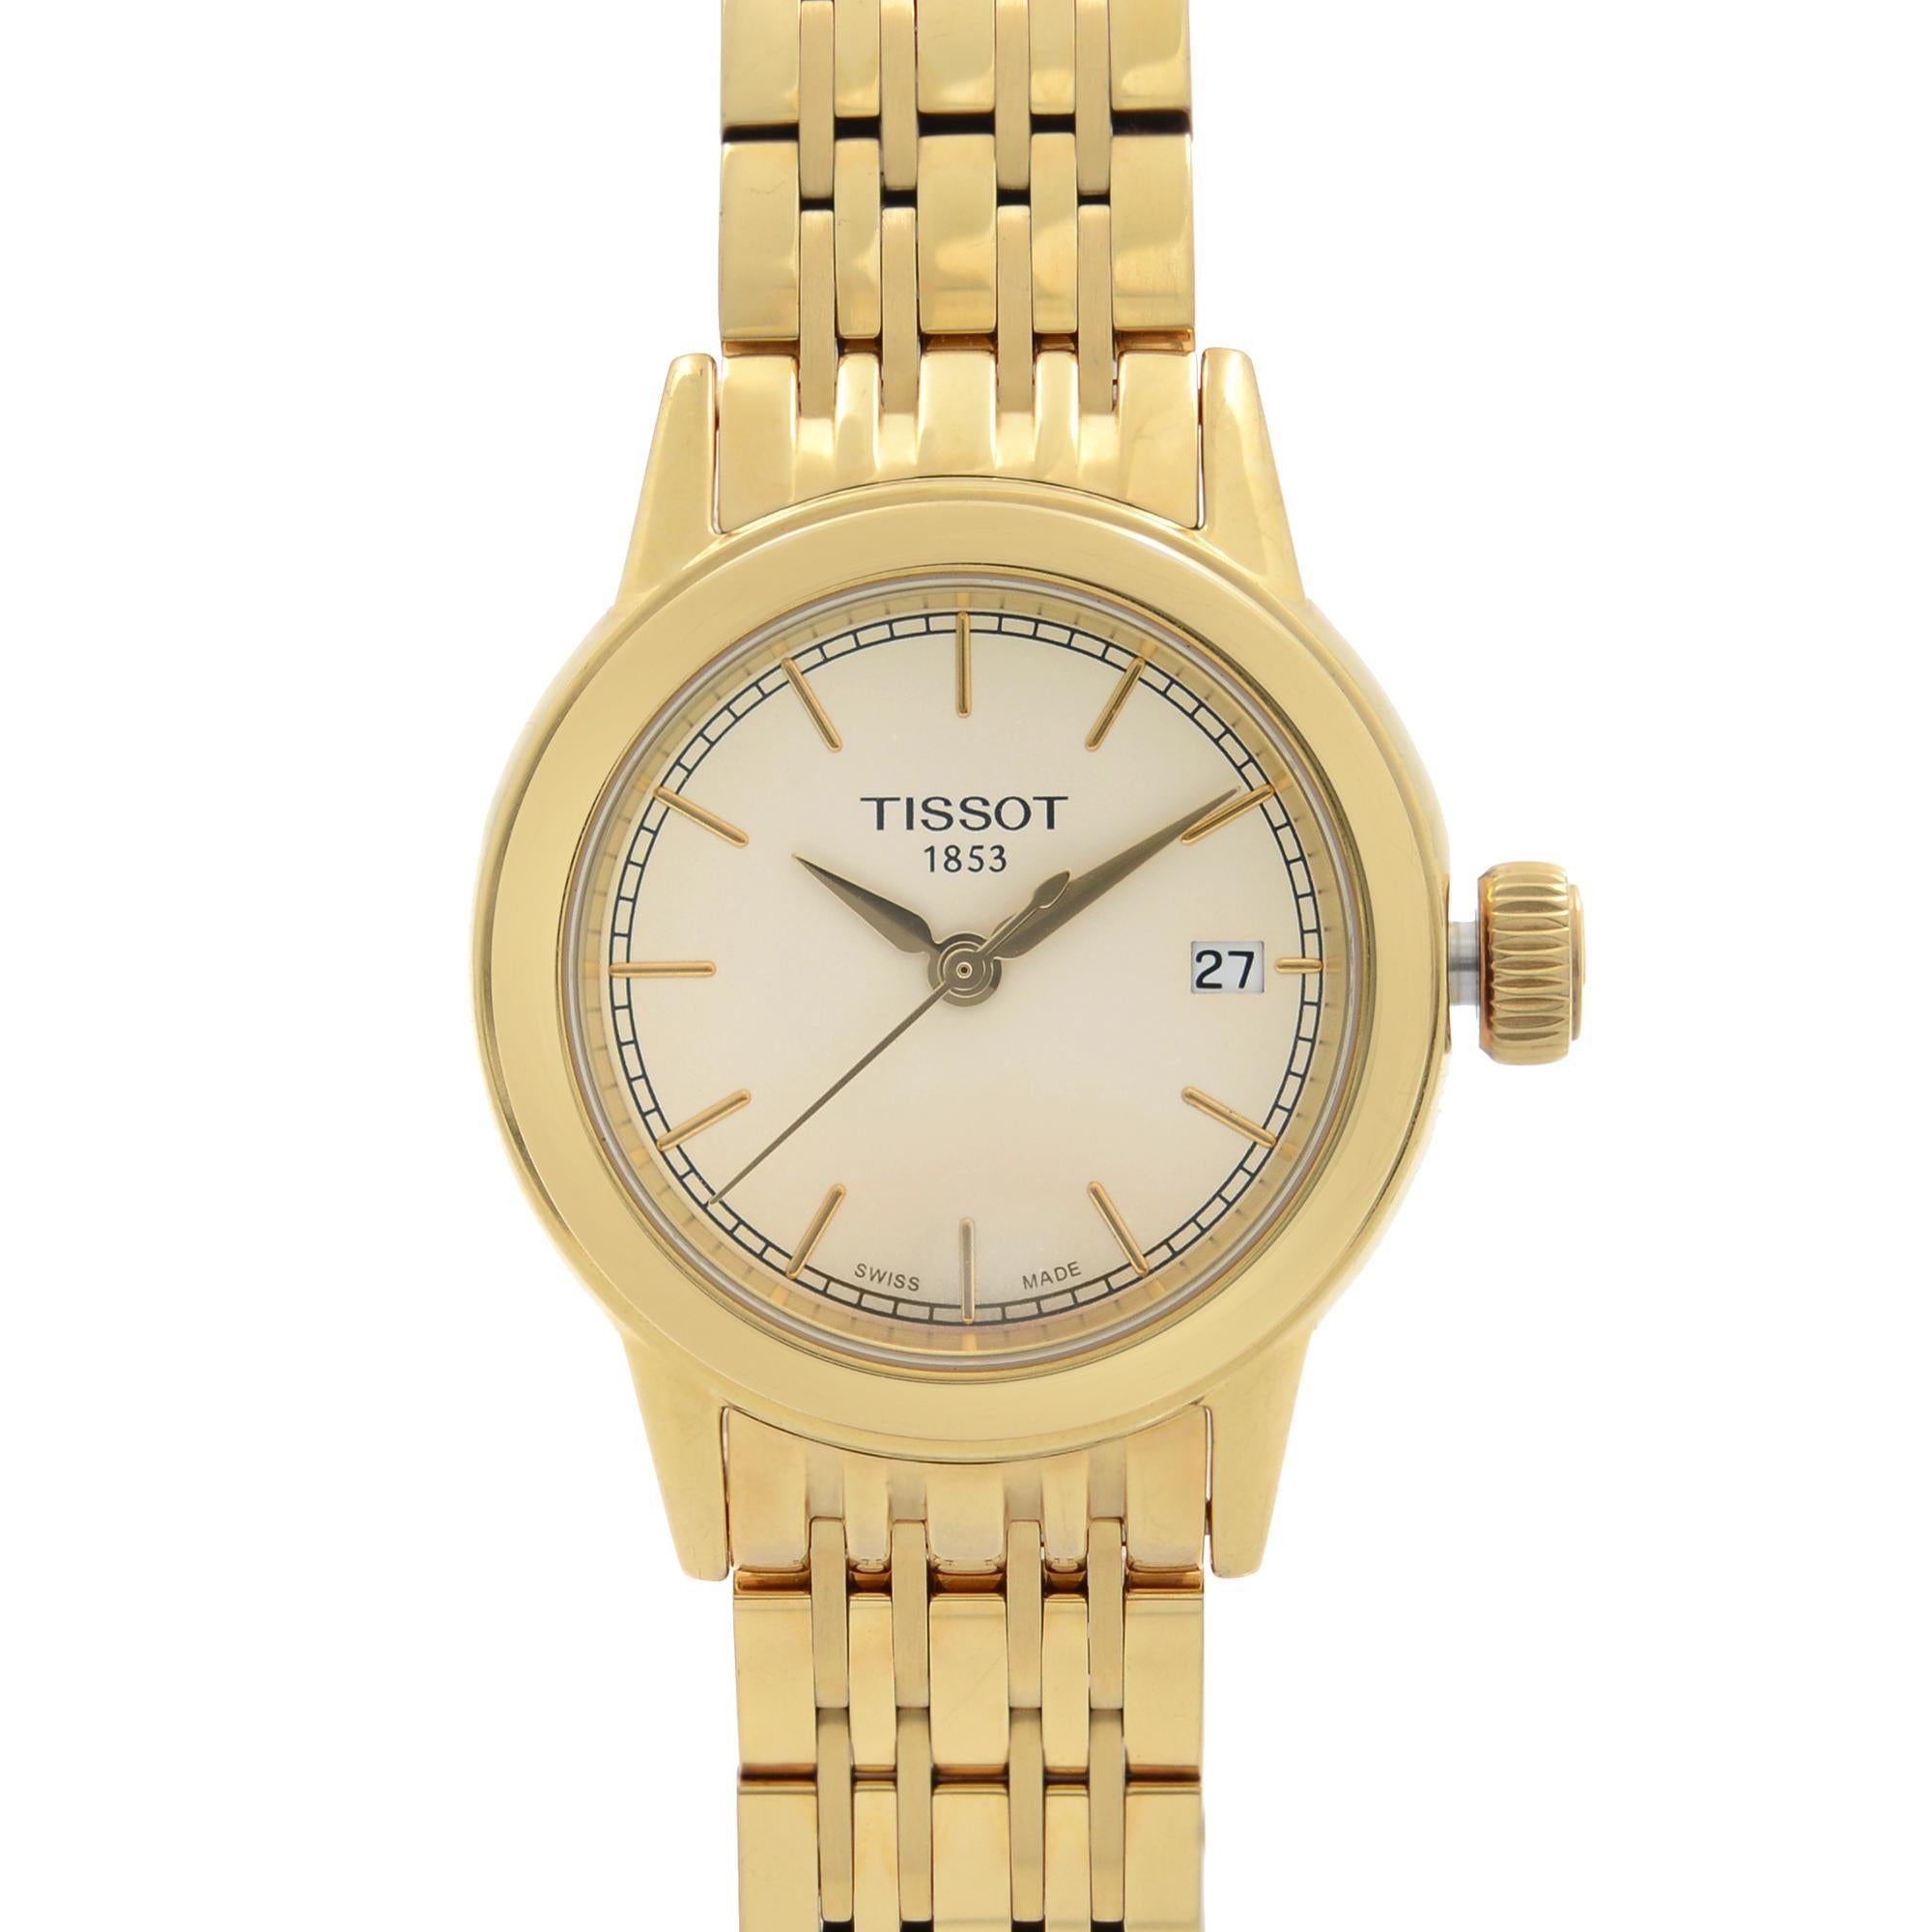 Pre-owned Tissot Carson 29mm Stainless Steel Yellow Gold PVD Champagne Dial Ladies Watch T085.210.33.021.00. Minor Scratches on the Case and Bracelet,  Oxidation Around the Inside of the Bracelet Under Closer Inspection. This timepiece is powered by